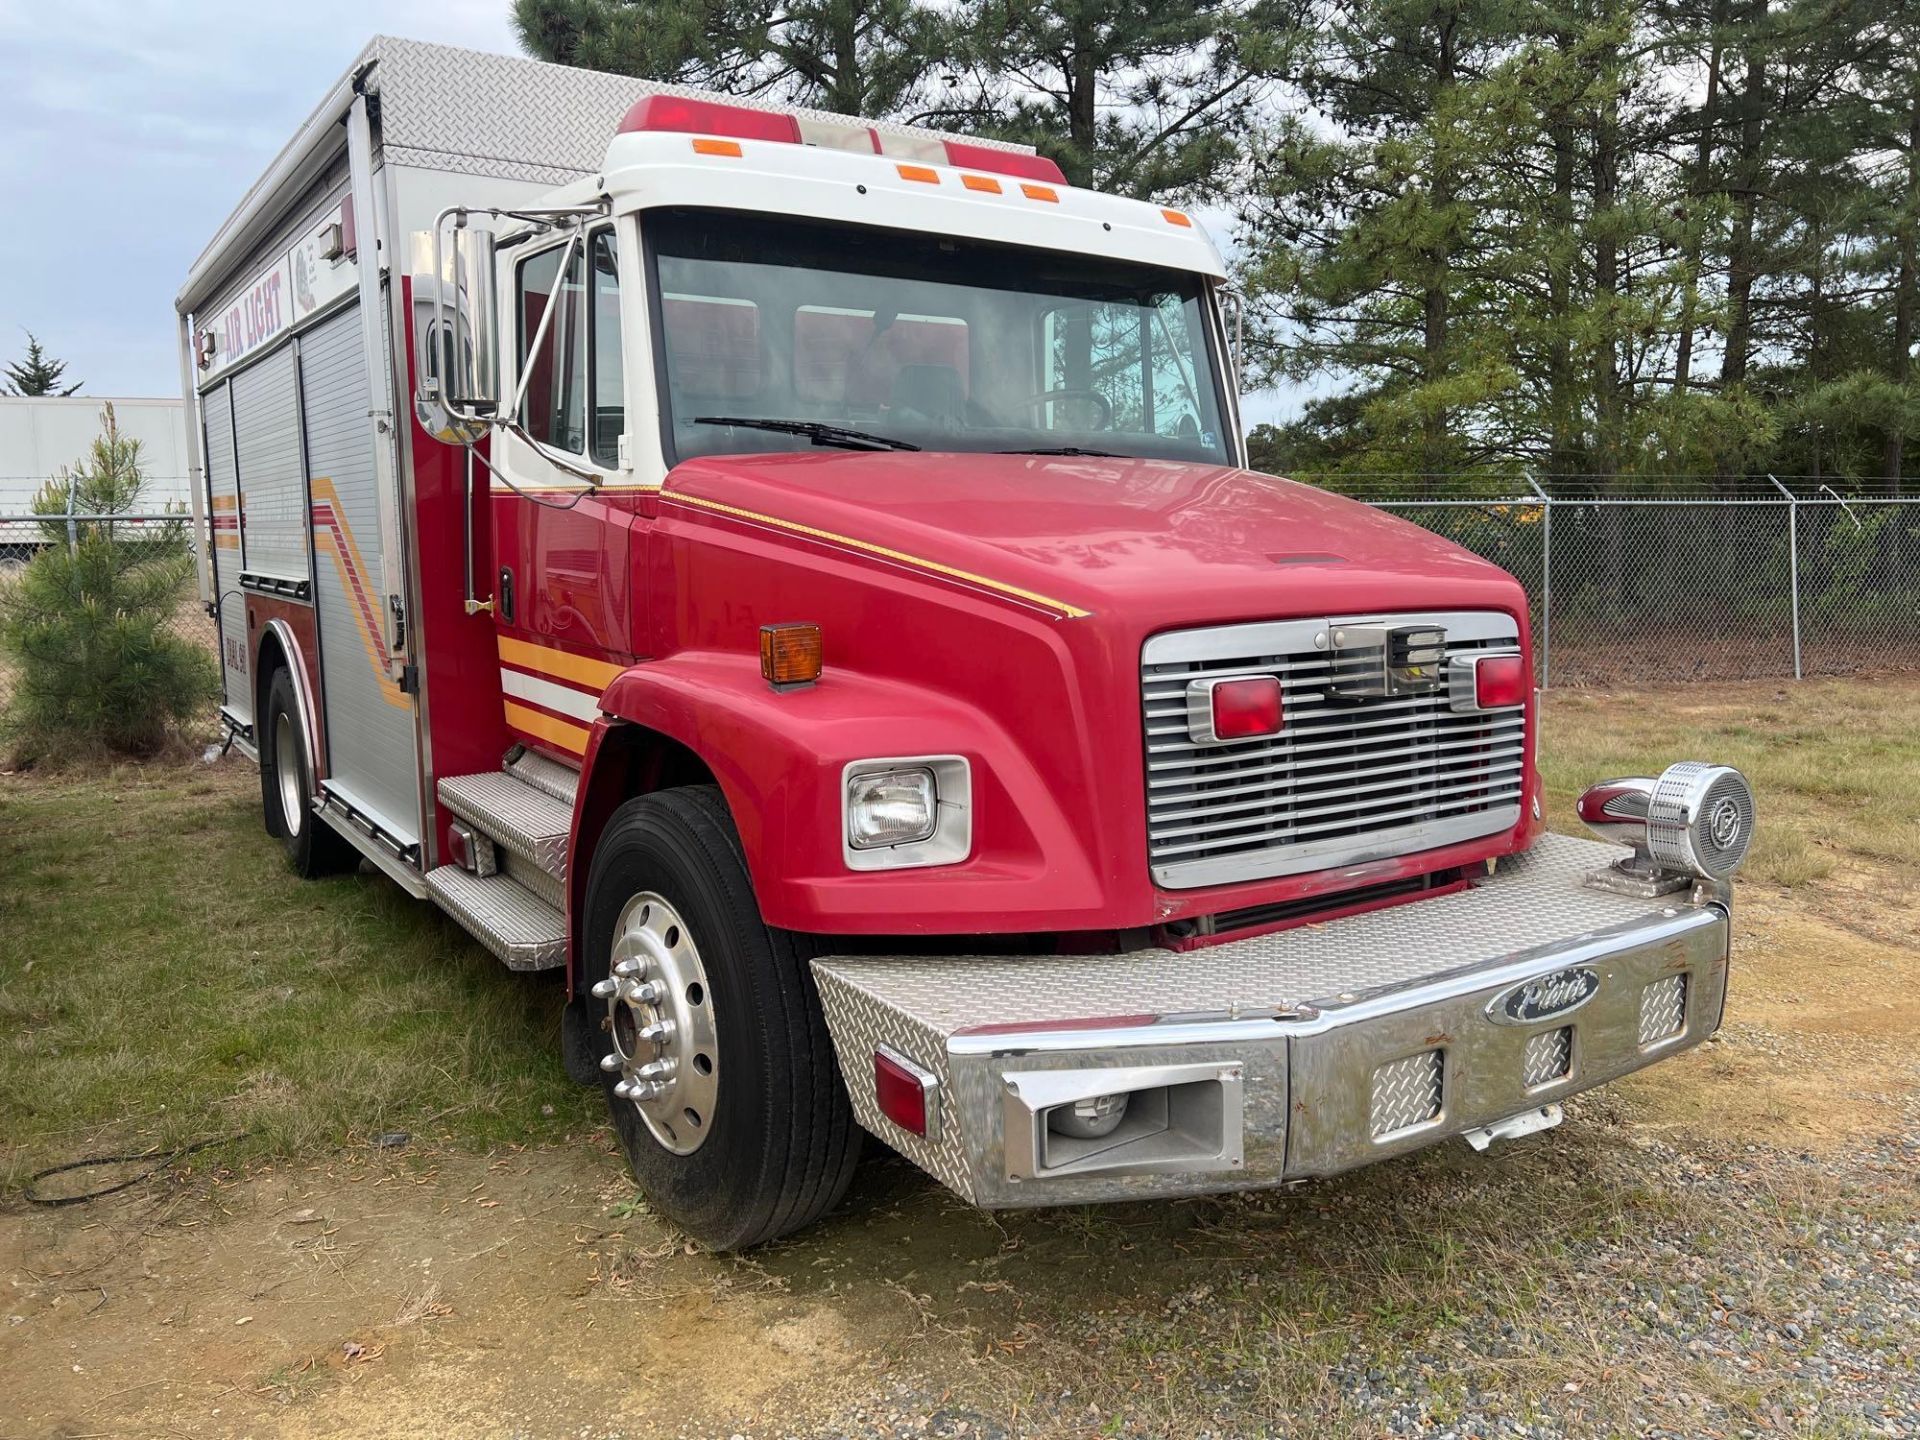 2001 Freightliner FL70 Fire/Rescue Truck - Image 2 of 24